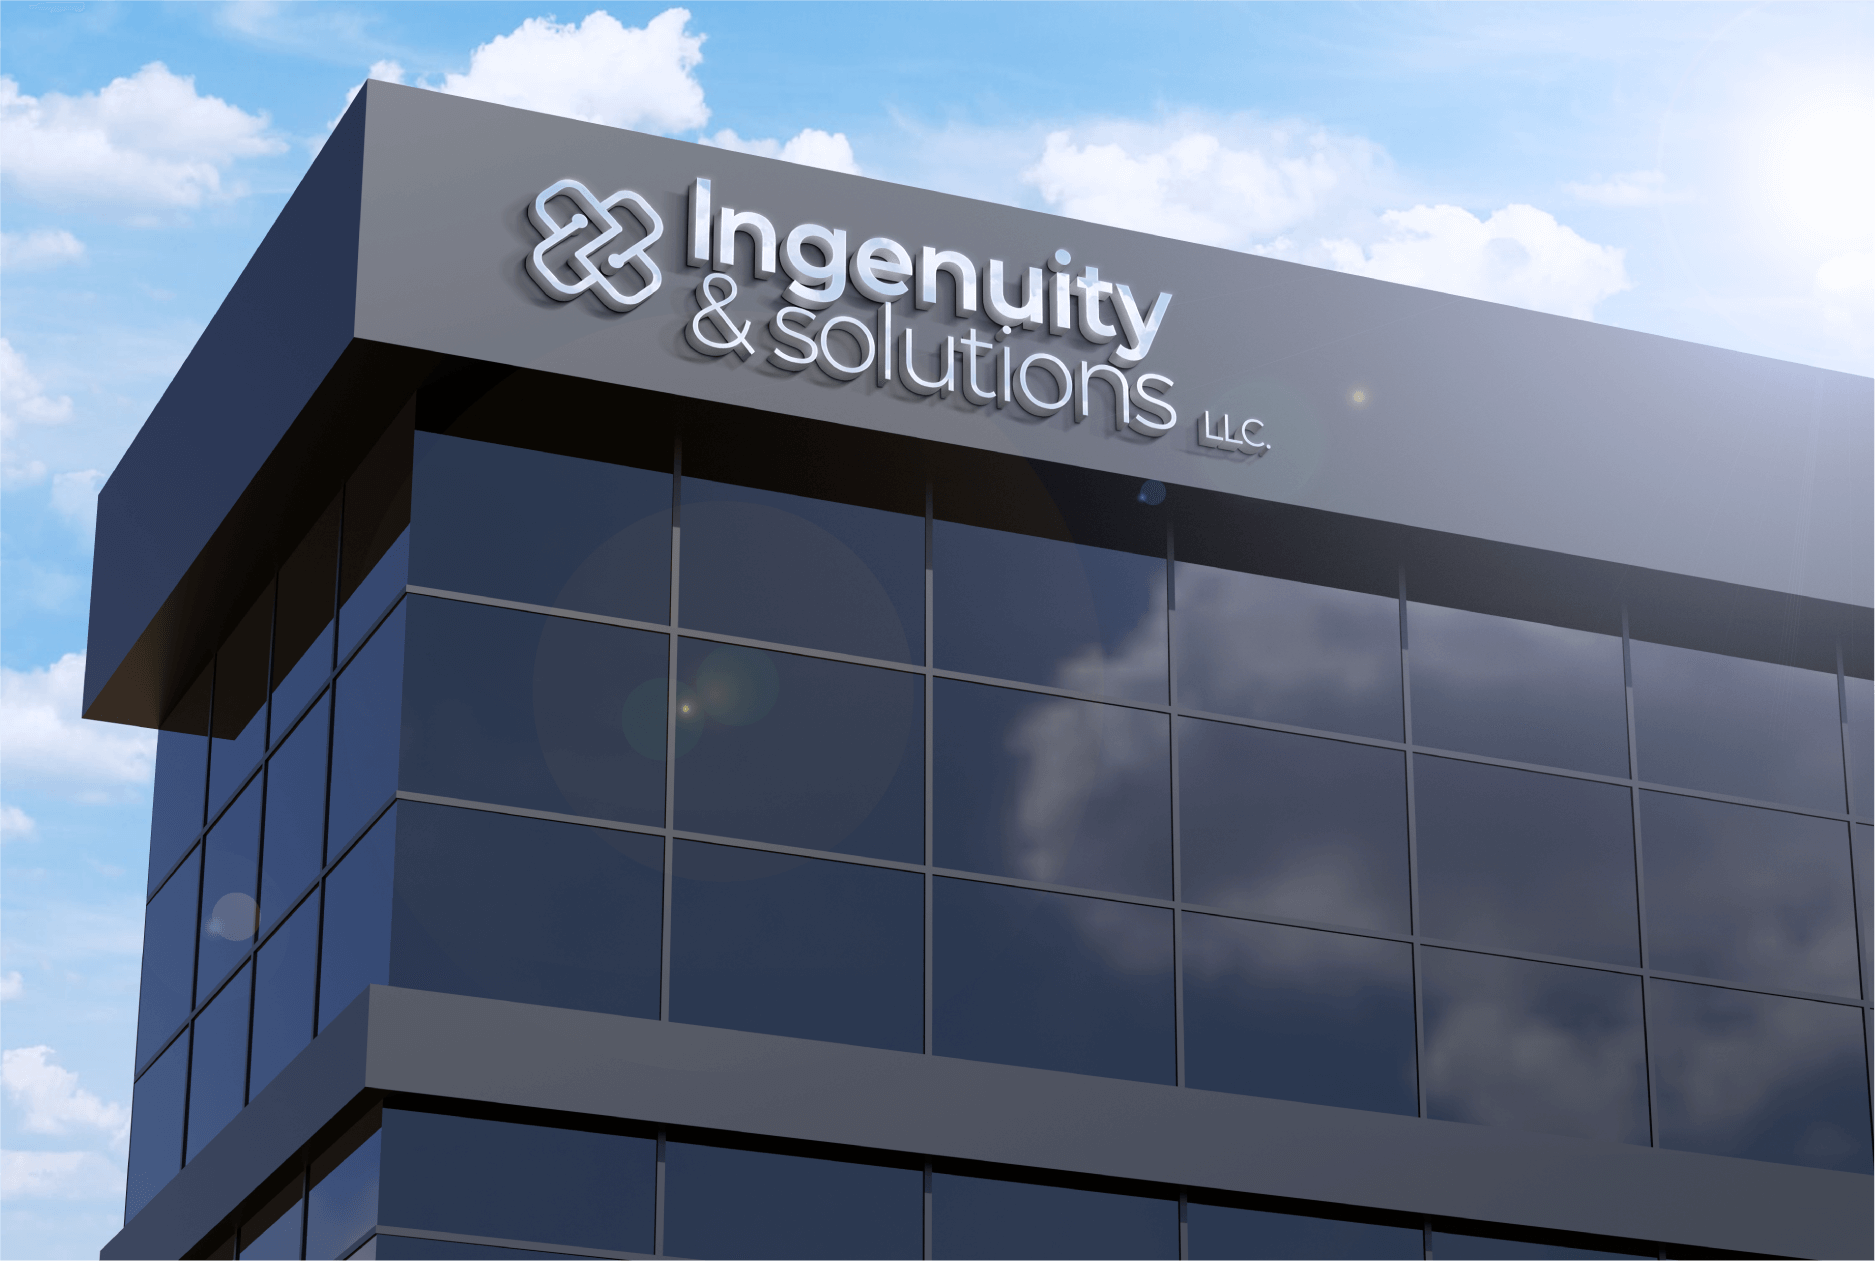 Company of Ingenuity & Solutions